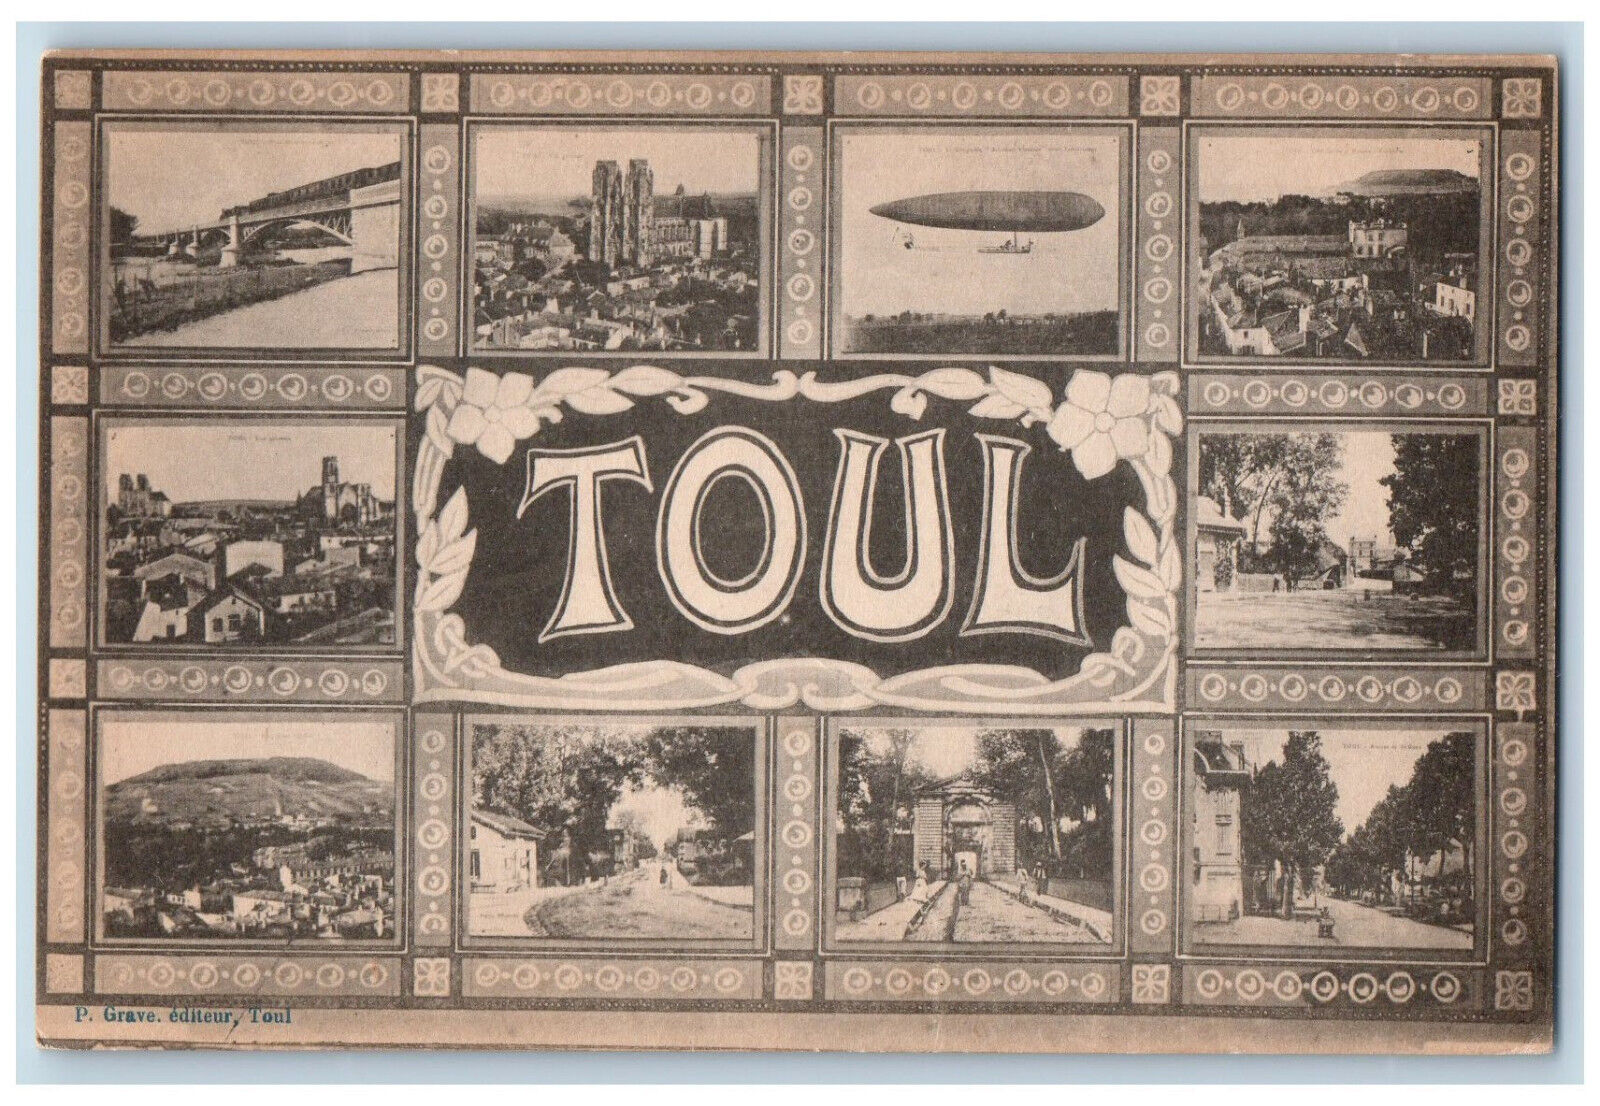 Toul Meurthe-et-Moselle France Postcard Multiview of Places and Buildings c1910